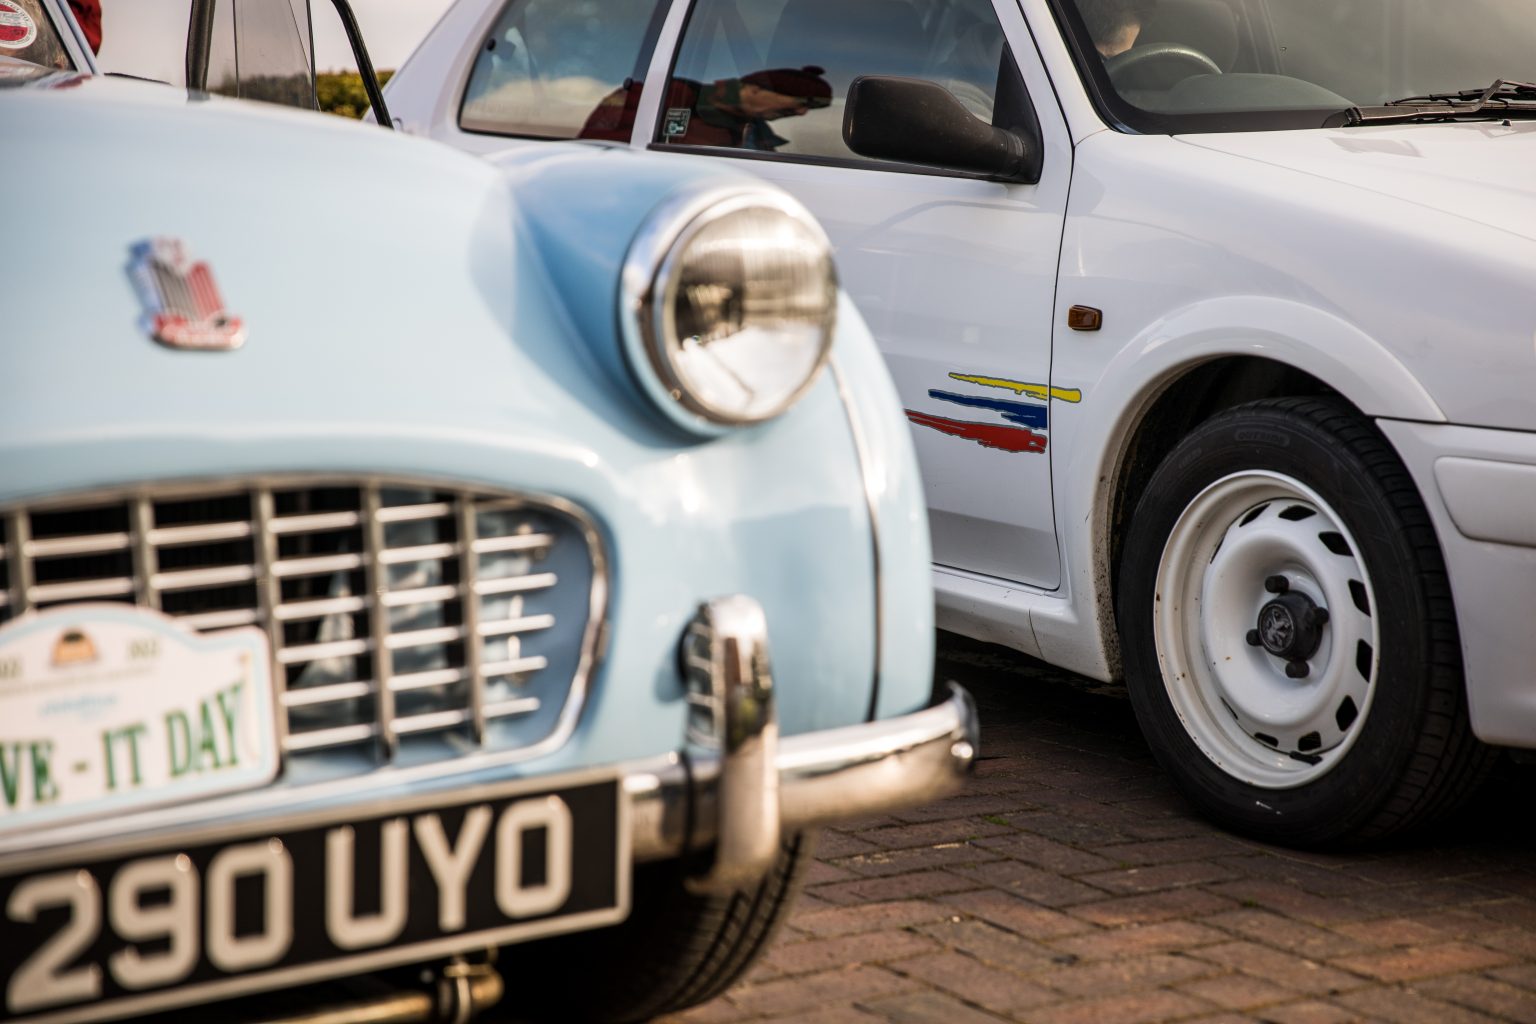 Drive It Day 2022 raises £47,000 for charity